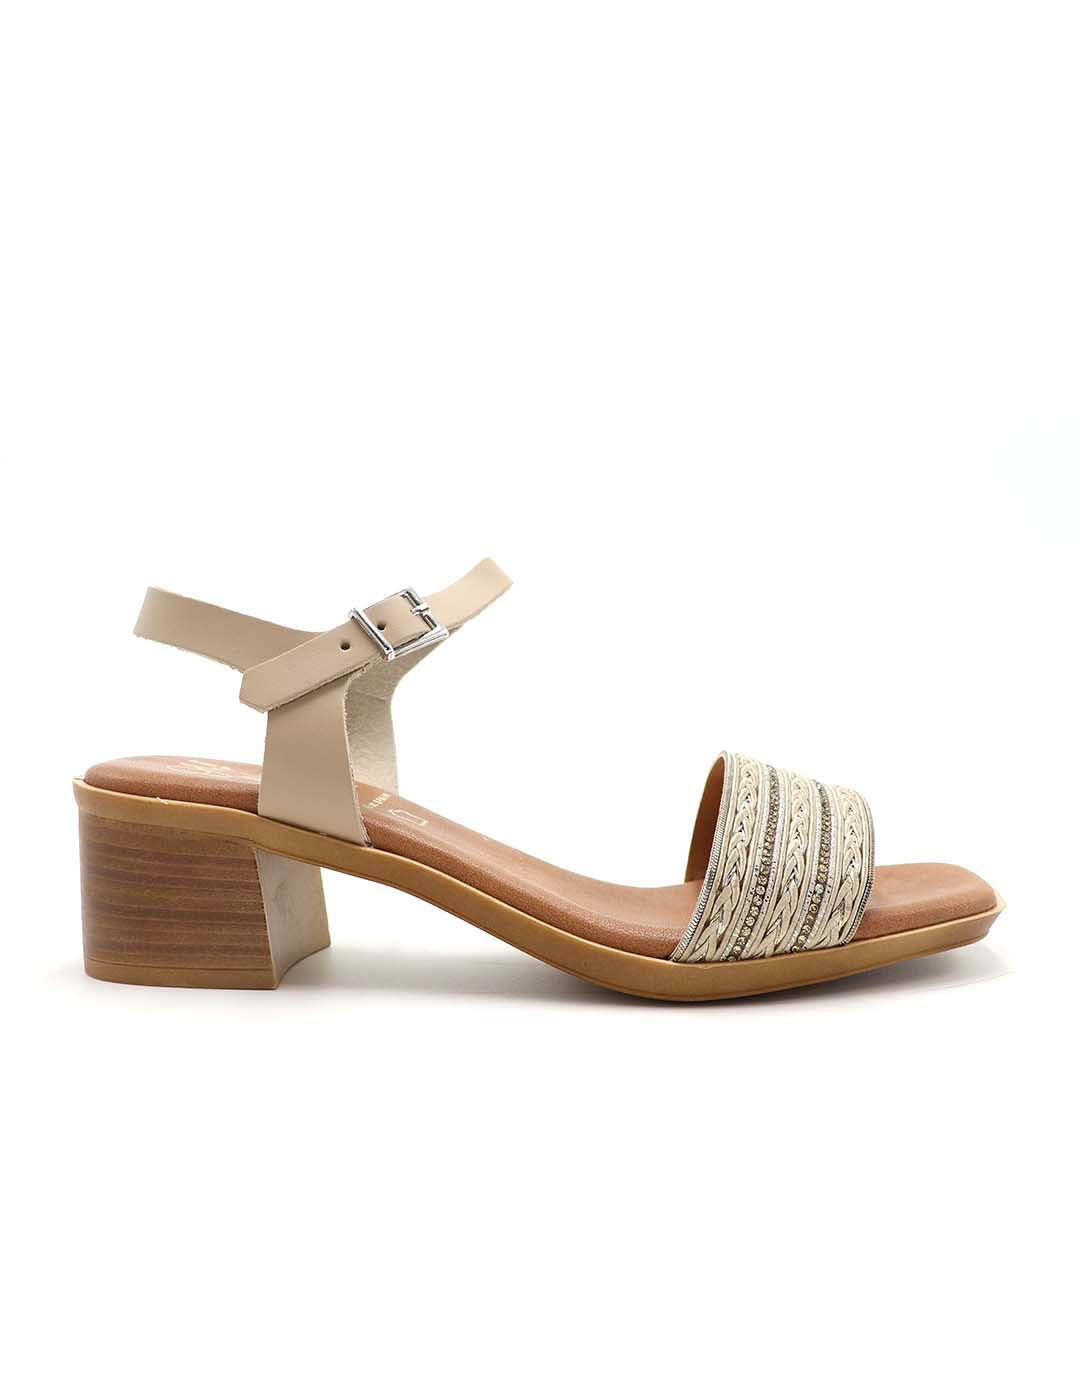 Sandalia OH! MY SANDALS Mujer Taupe